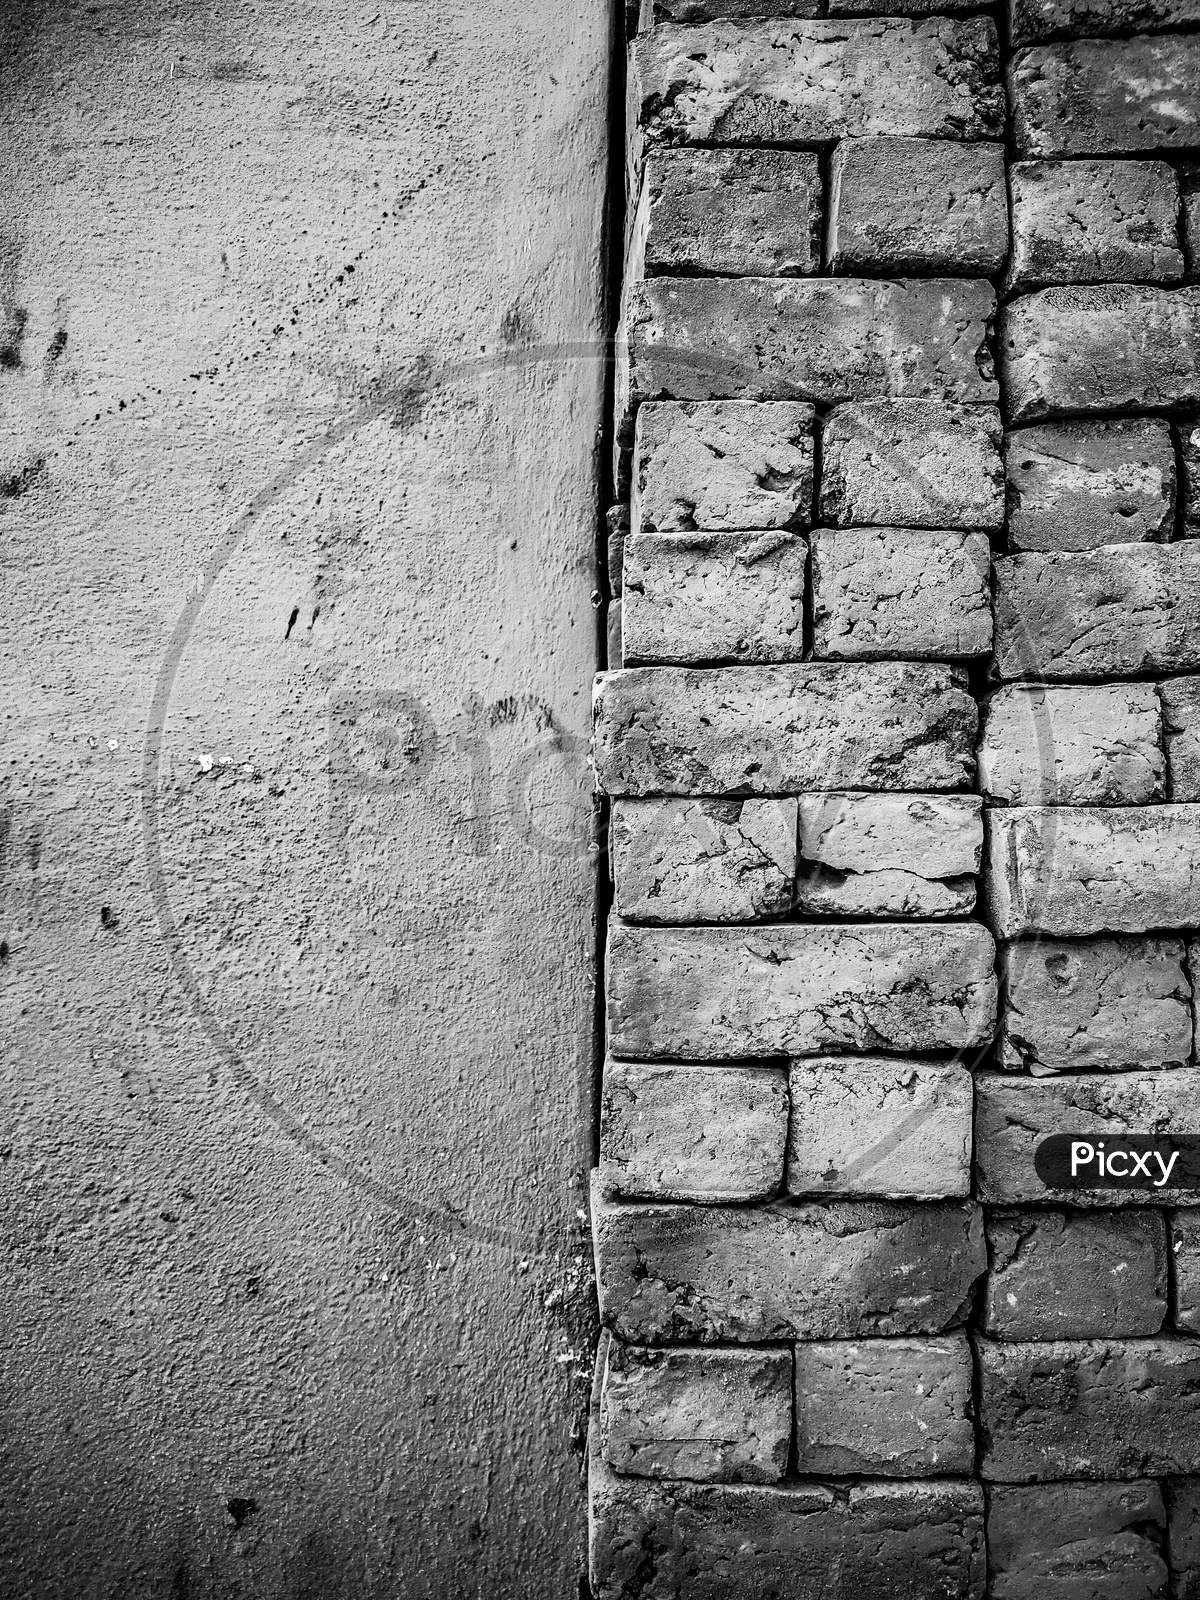 Old Grunge Monochrome Brick Wall Background With Empty Wall Space For Copy Text.